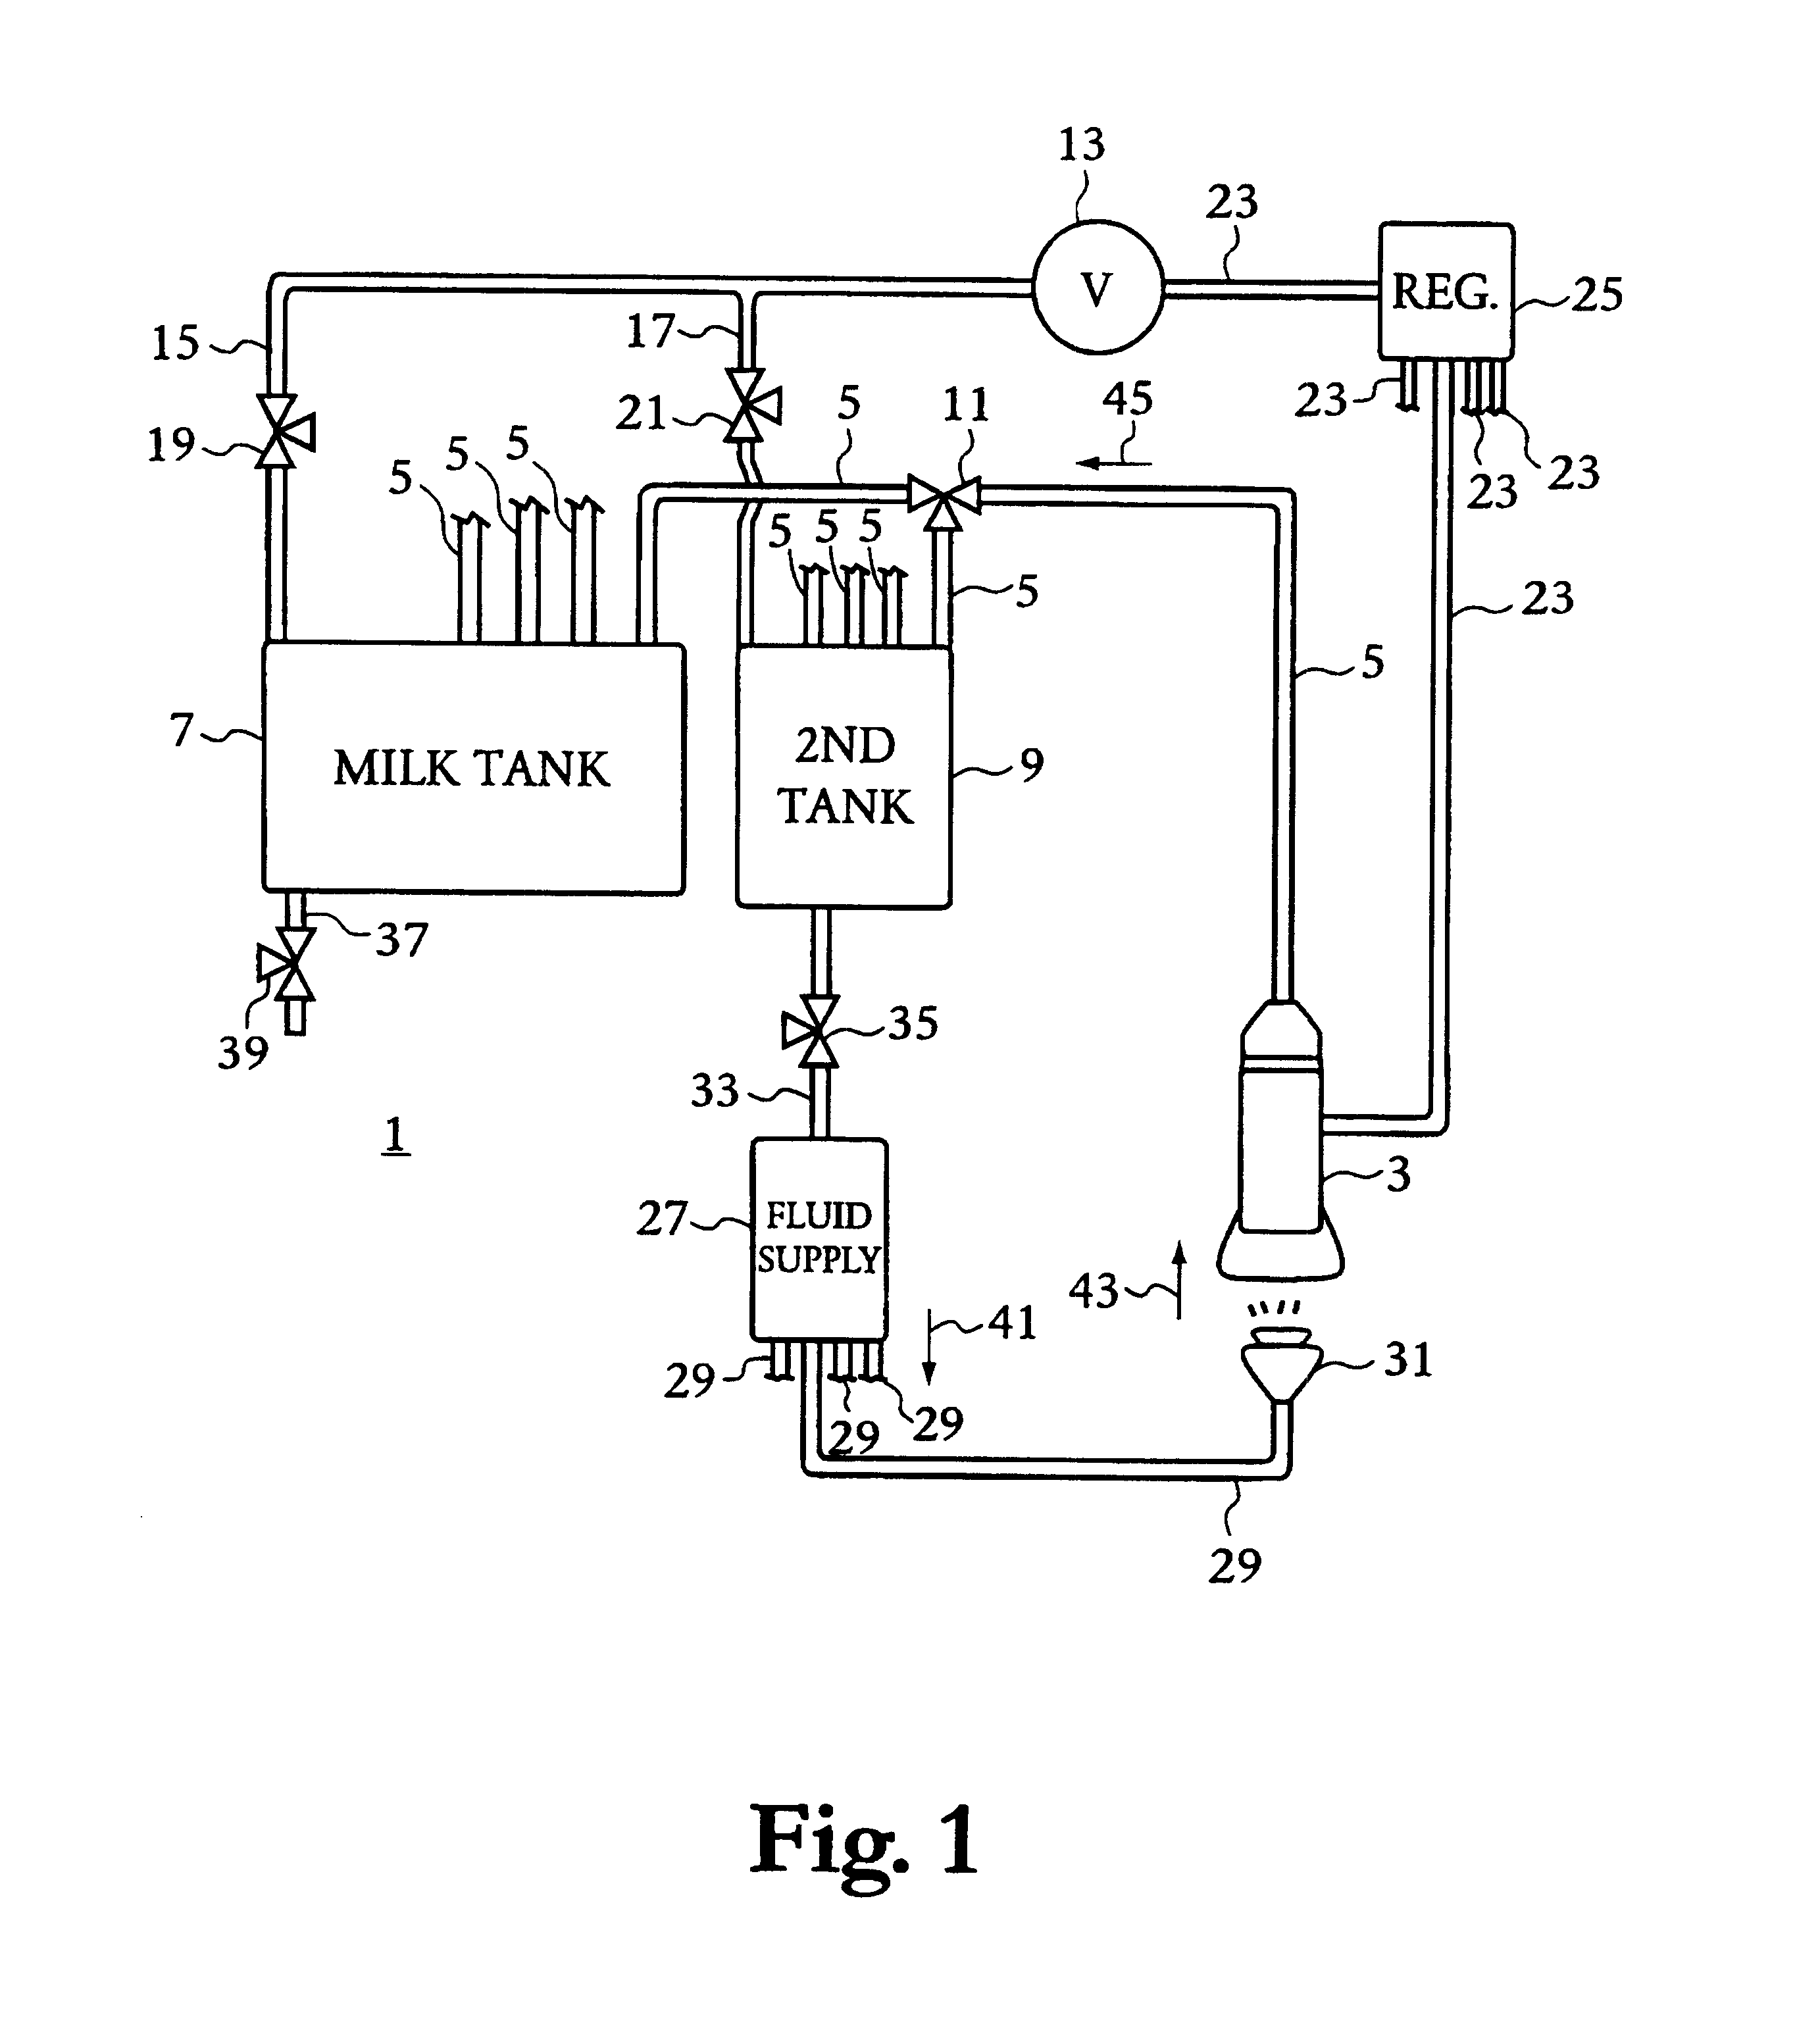 Method and apparatus for teat cup cleaning